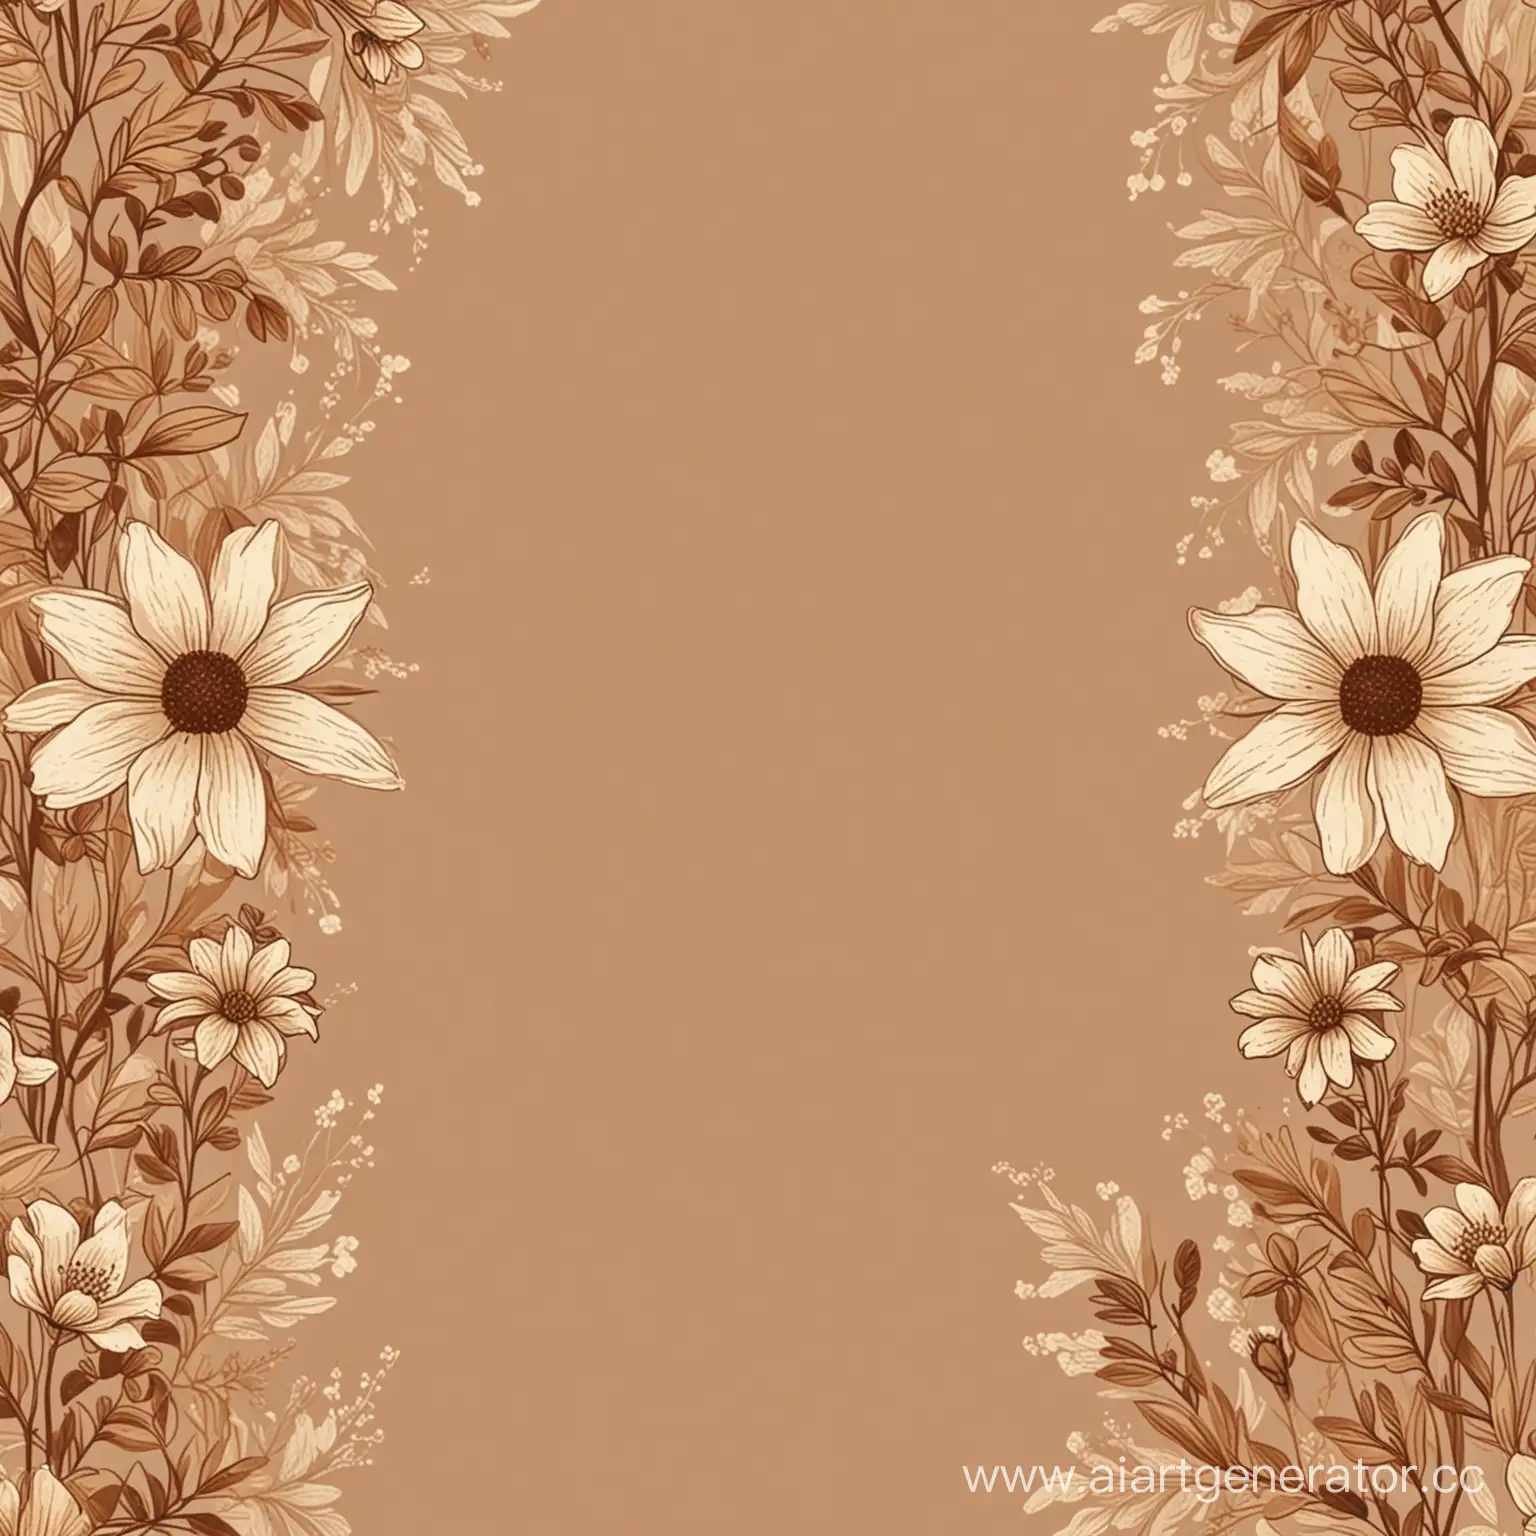 Tranquil-Brown-Floral-Background